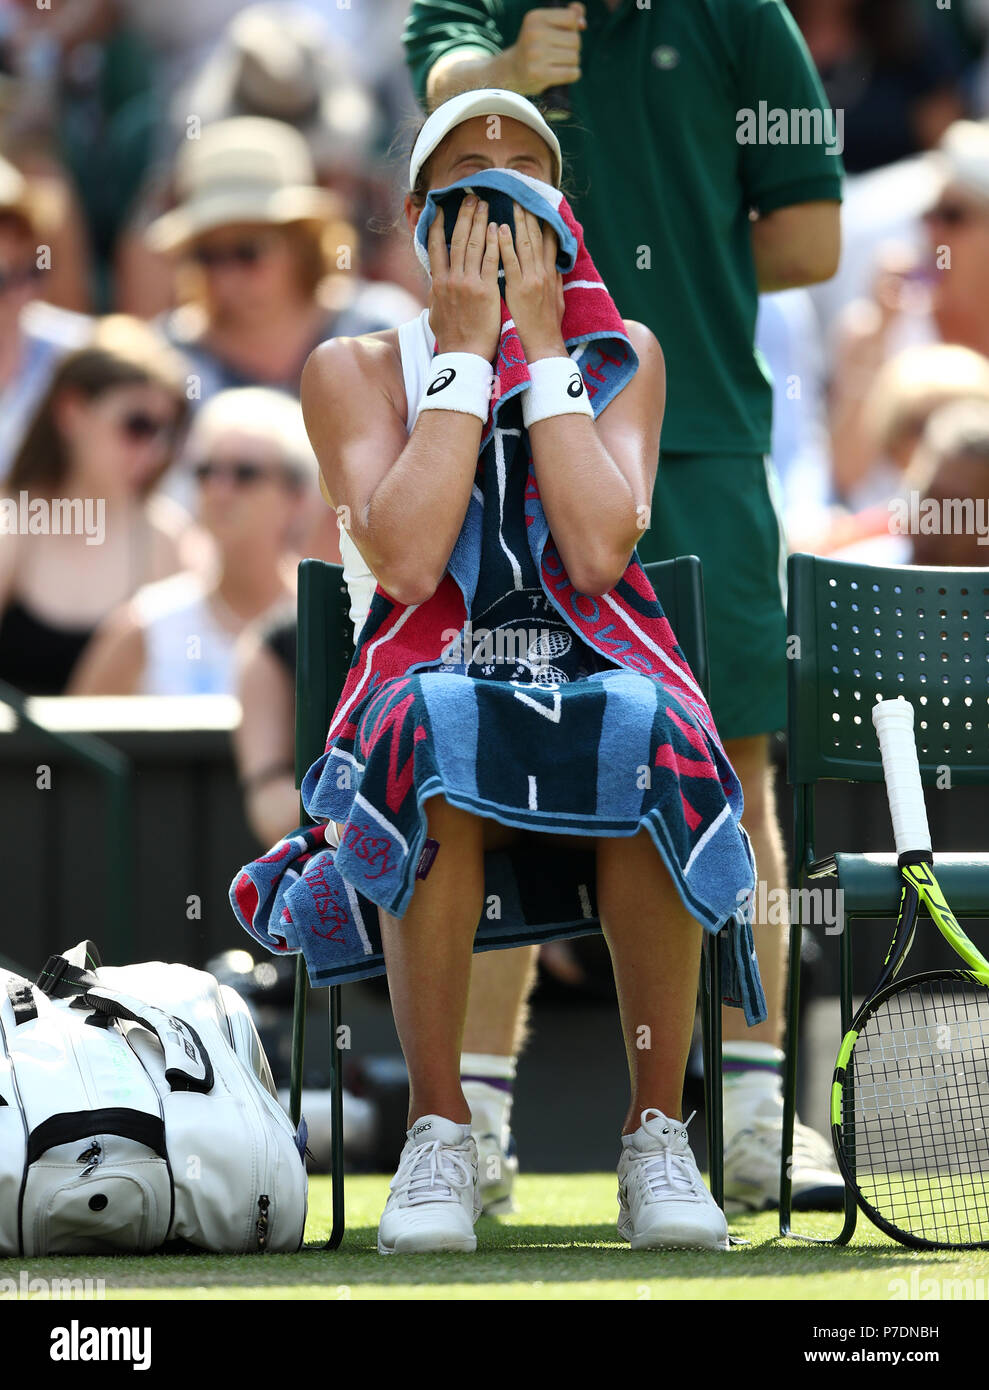 Johanna Konta during a change of ends on day four of the Wimbledon Championships at the All England Lawn Tennis and Croquet Club, Wimbledon. PRESS ASSOCIATION Photo. Picture date: Thursday July 5, 2018. See PA story TENNIS Wimbledon. Photo credit should read: John Walton/PA Wire. Stock Photo